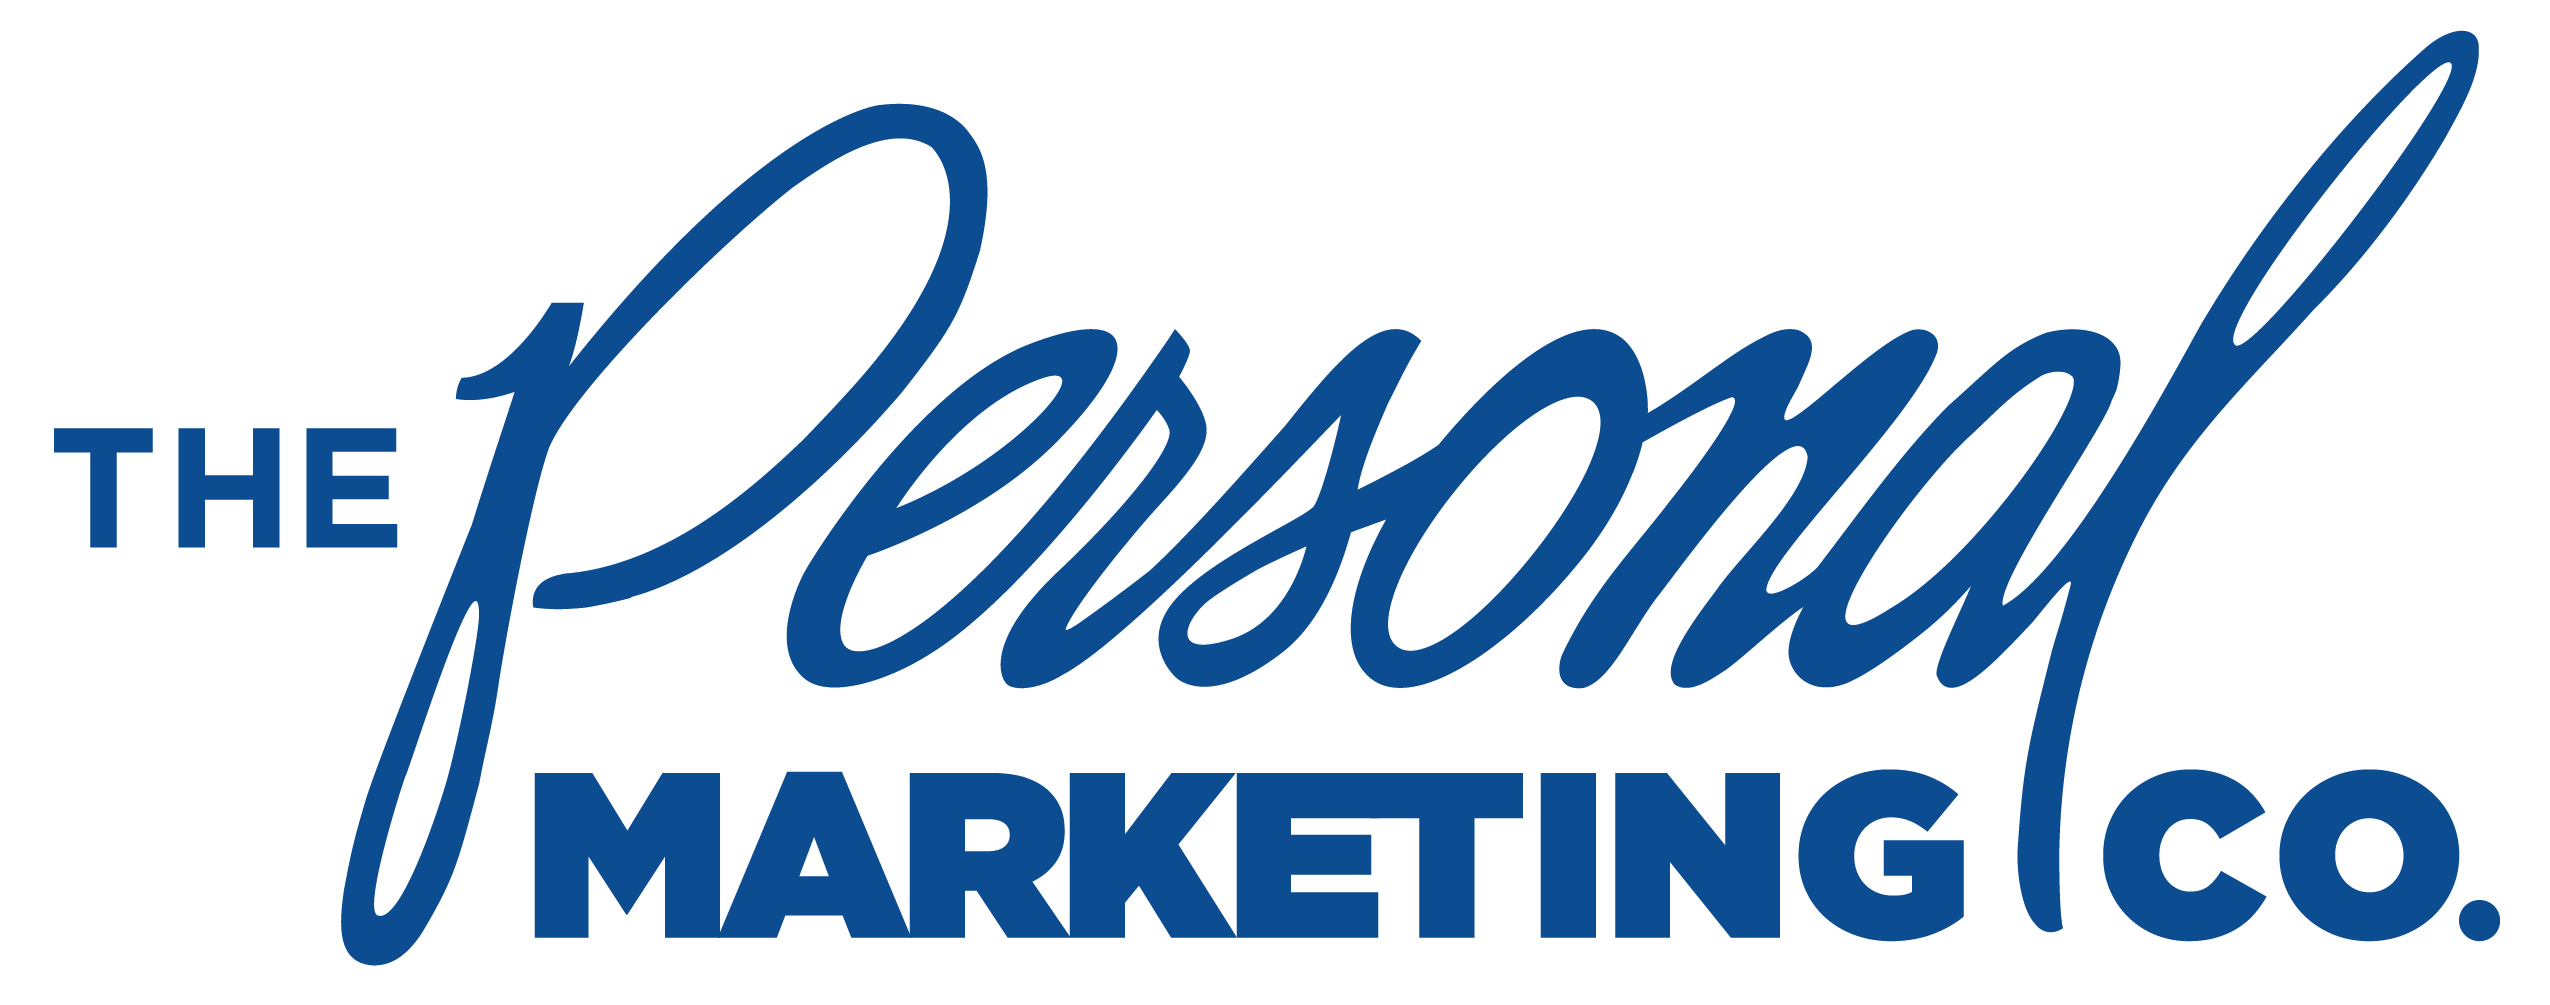 The Personal Marketing Co.